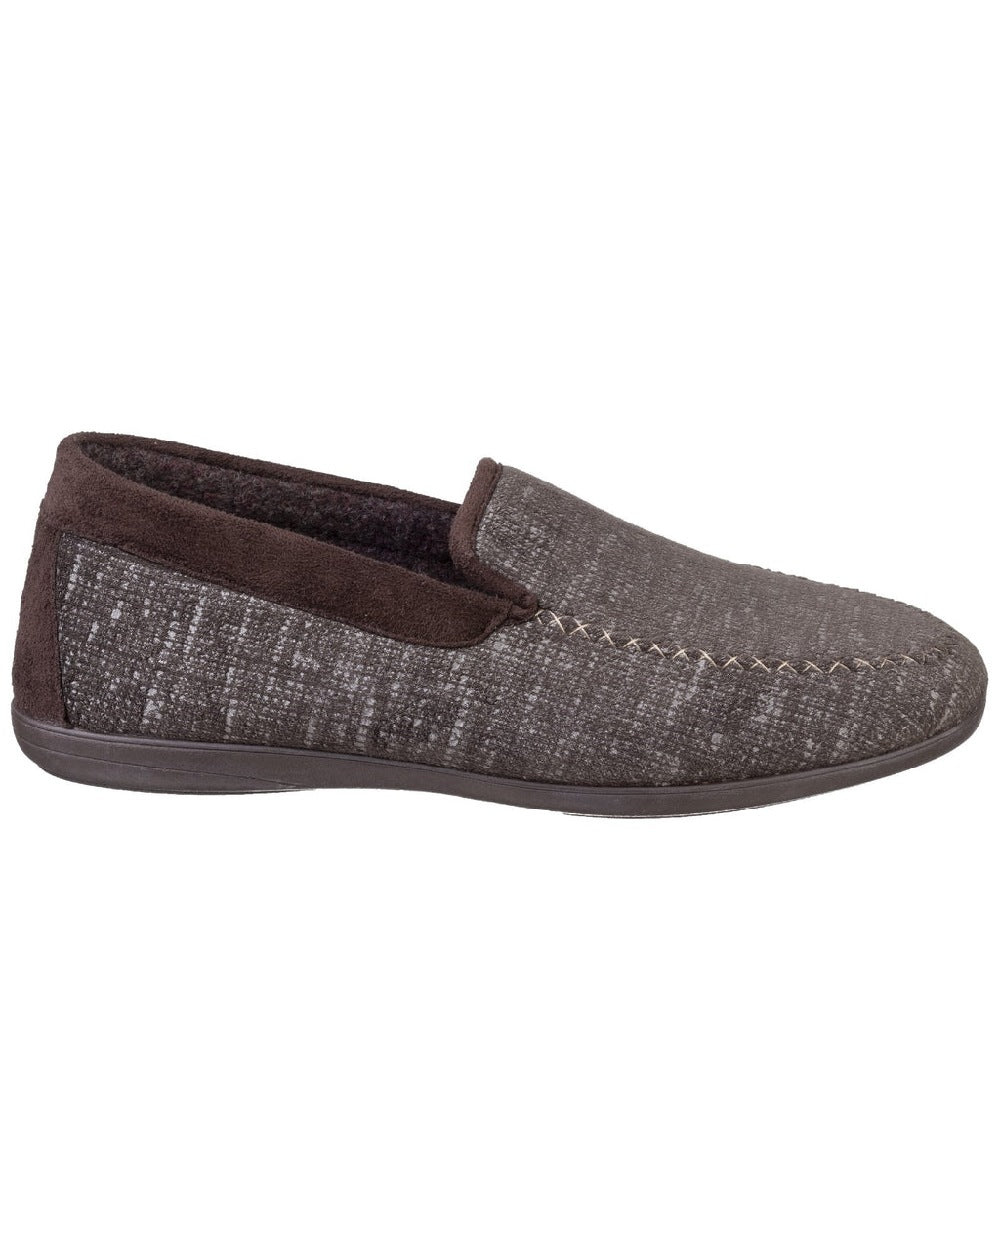 Cotswold Mens Stanley Loafer Slippers in Brown 